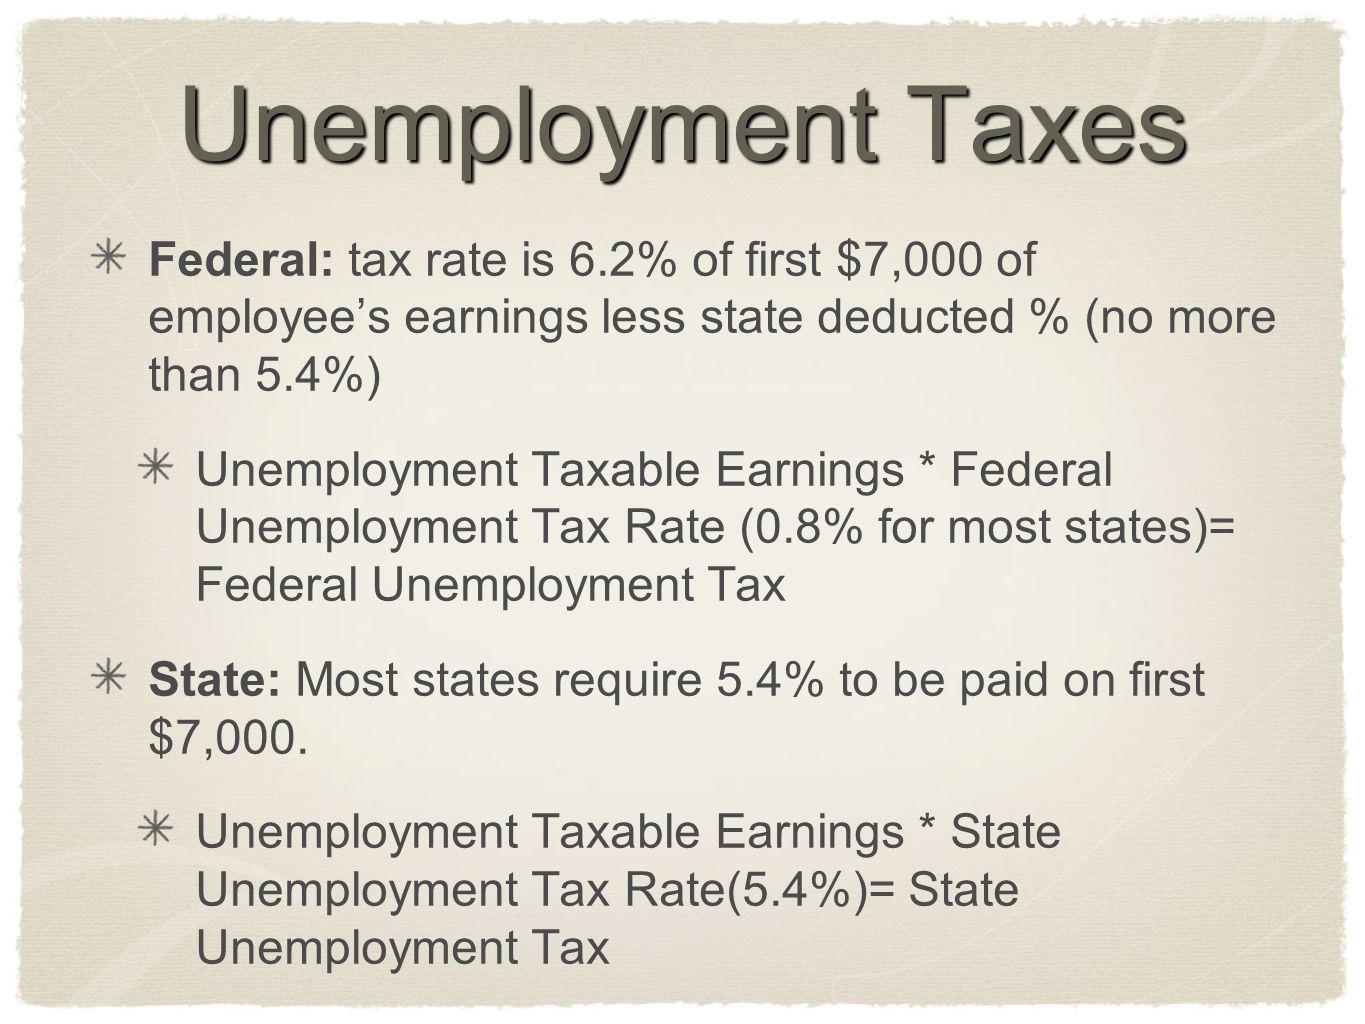 Unemployment Taxes Federal: tax rate is 6.2% of first $7,000 of employee’s earnings less state deducted % (no more than 5.4%)